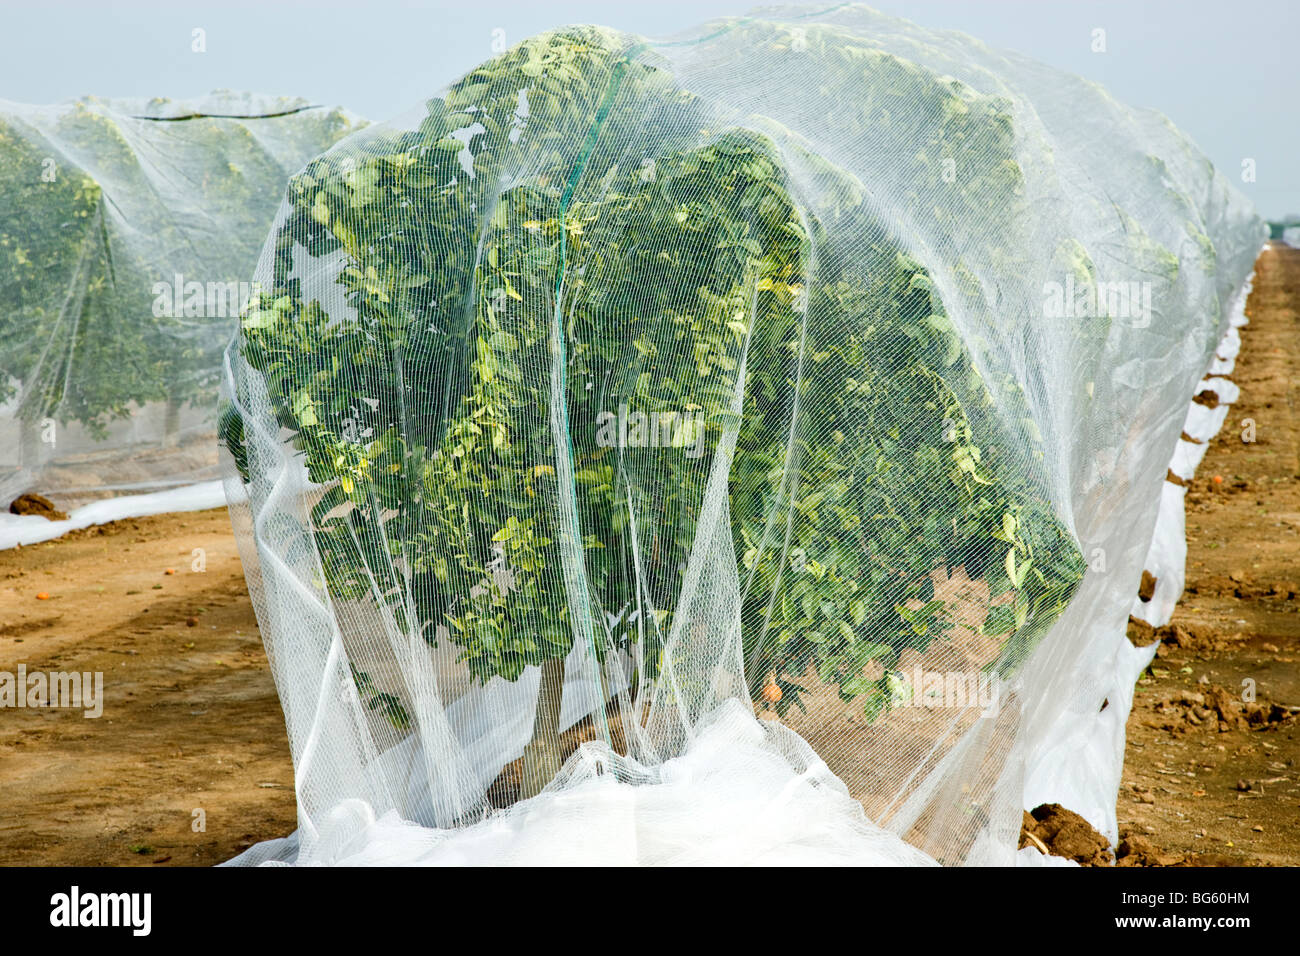 Netting over young Citrus  'Mandarine' trees to prevent cross pollination. Stock Photo